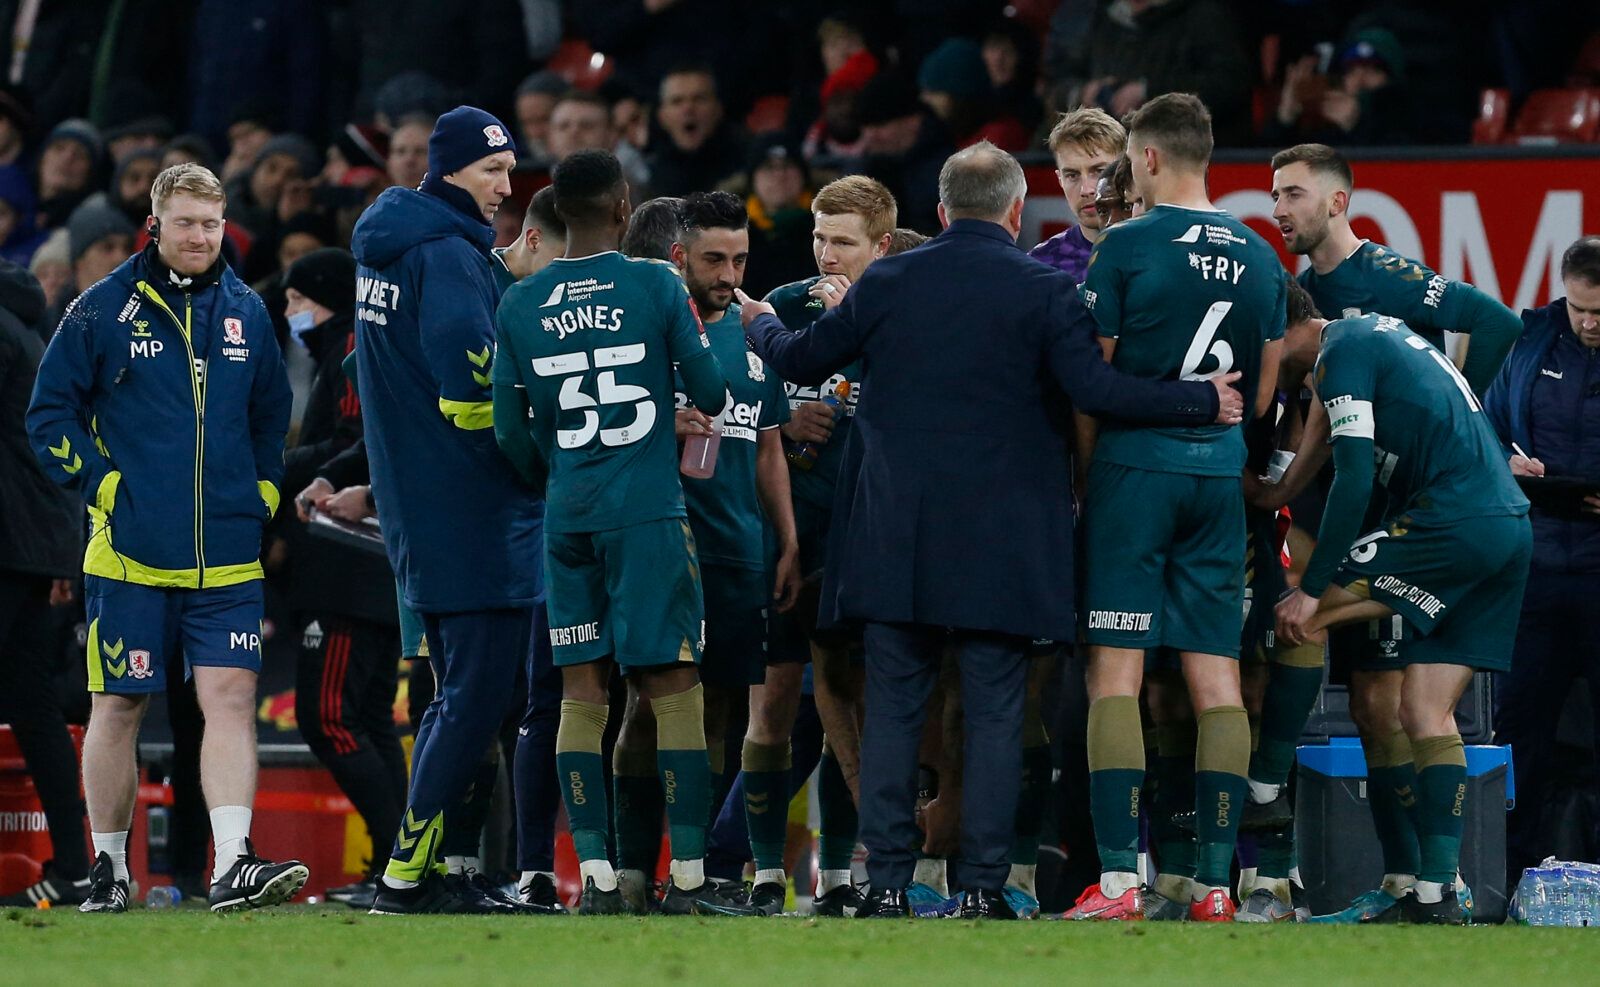 Soccer Football - FA Cup Fourth Round - Manchester United v Middlesbrough - Old Trafford, Manchester, Britain - February 4, 2022 Middlesbrough manager Chris Wilder talks to his players before the start of extra time REUTERS/Craig Brough